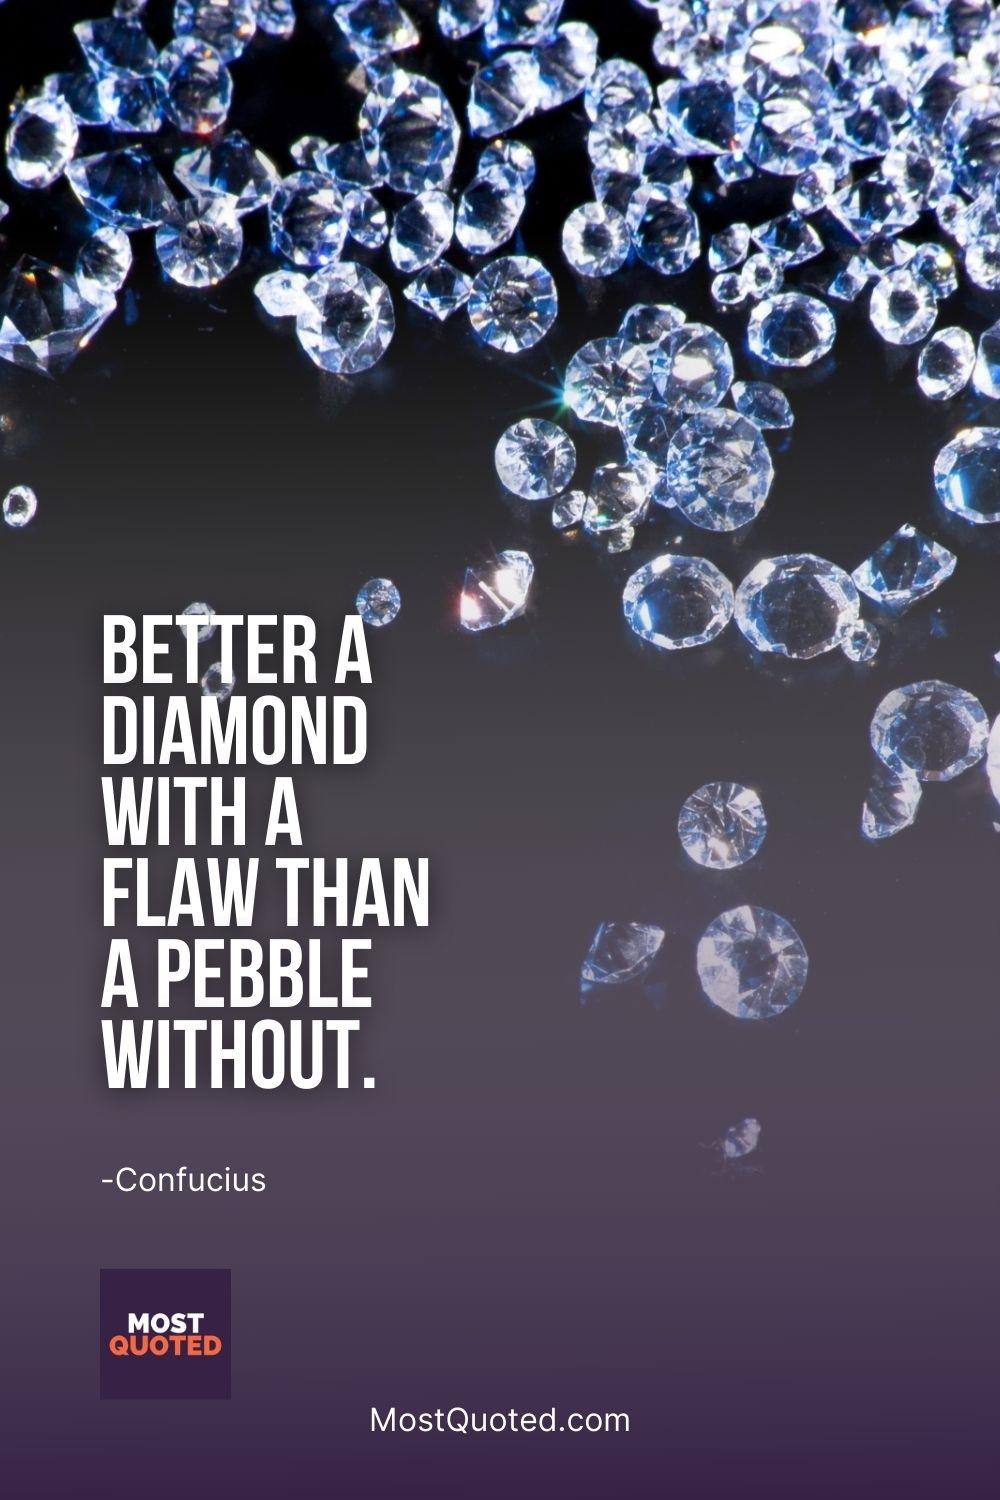 Better a diamond with a flaw than a pebble without. - Confucius